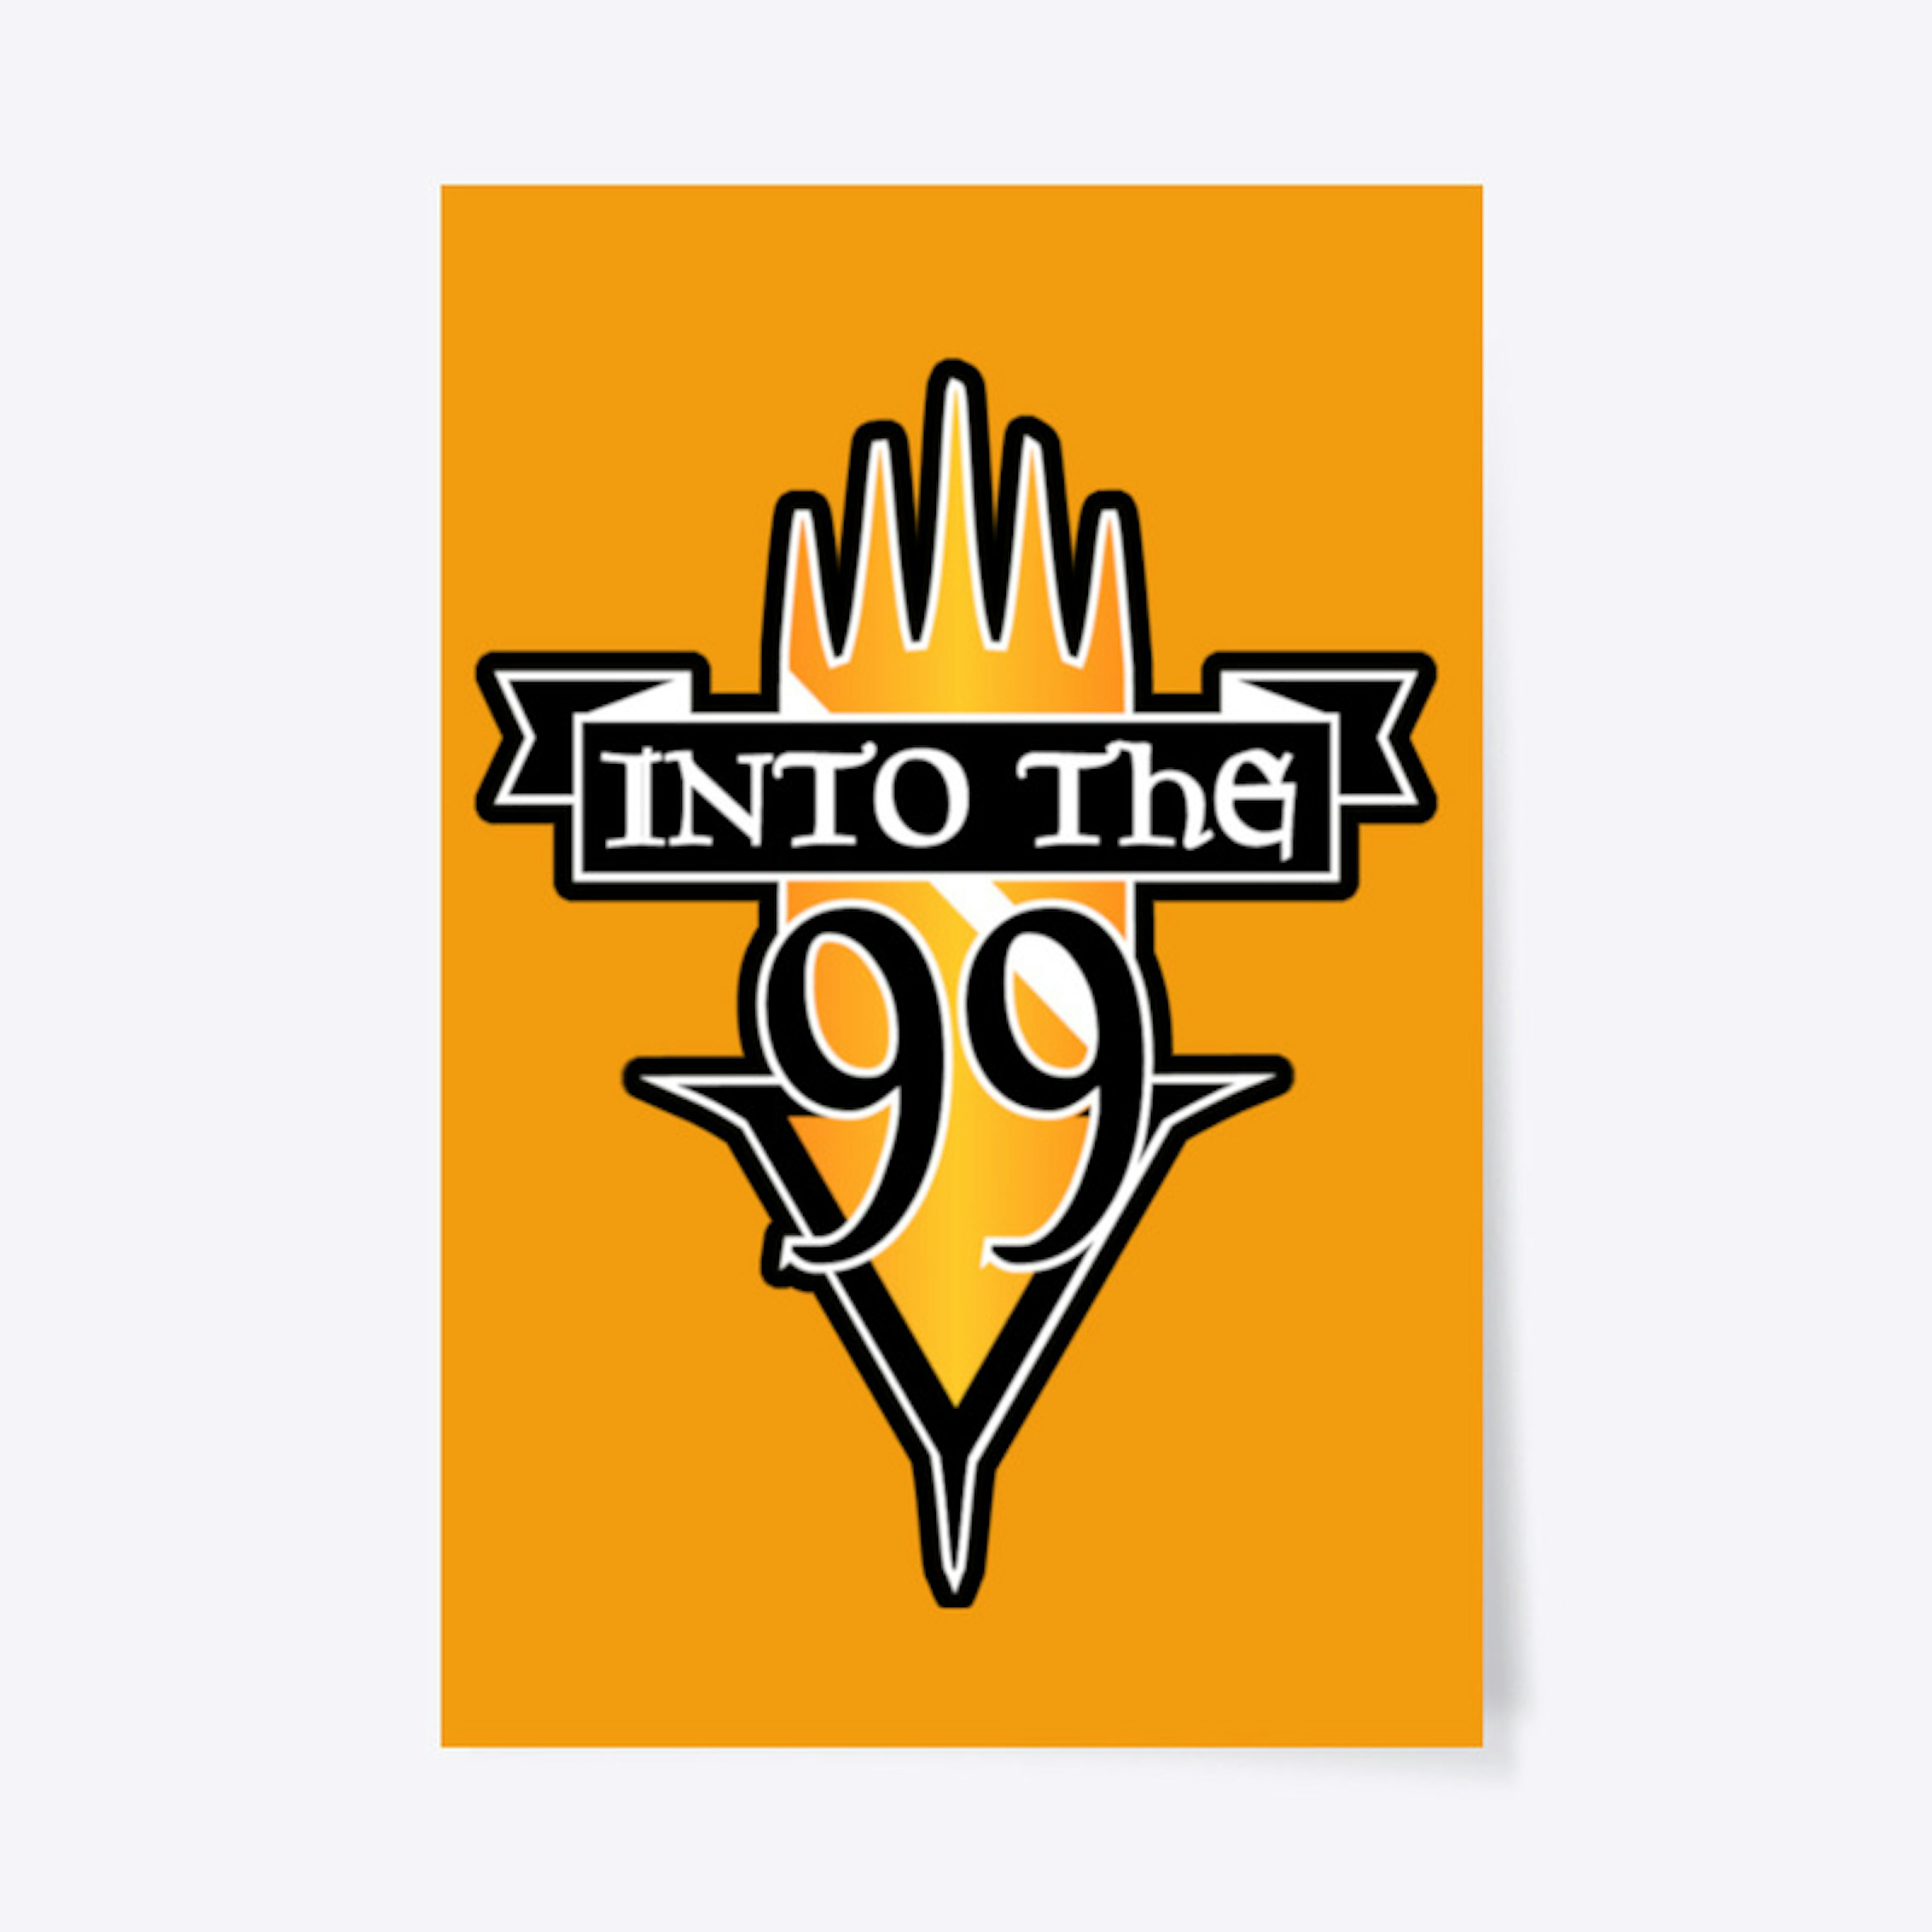 Into the 99 poster